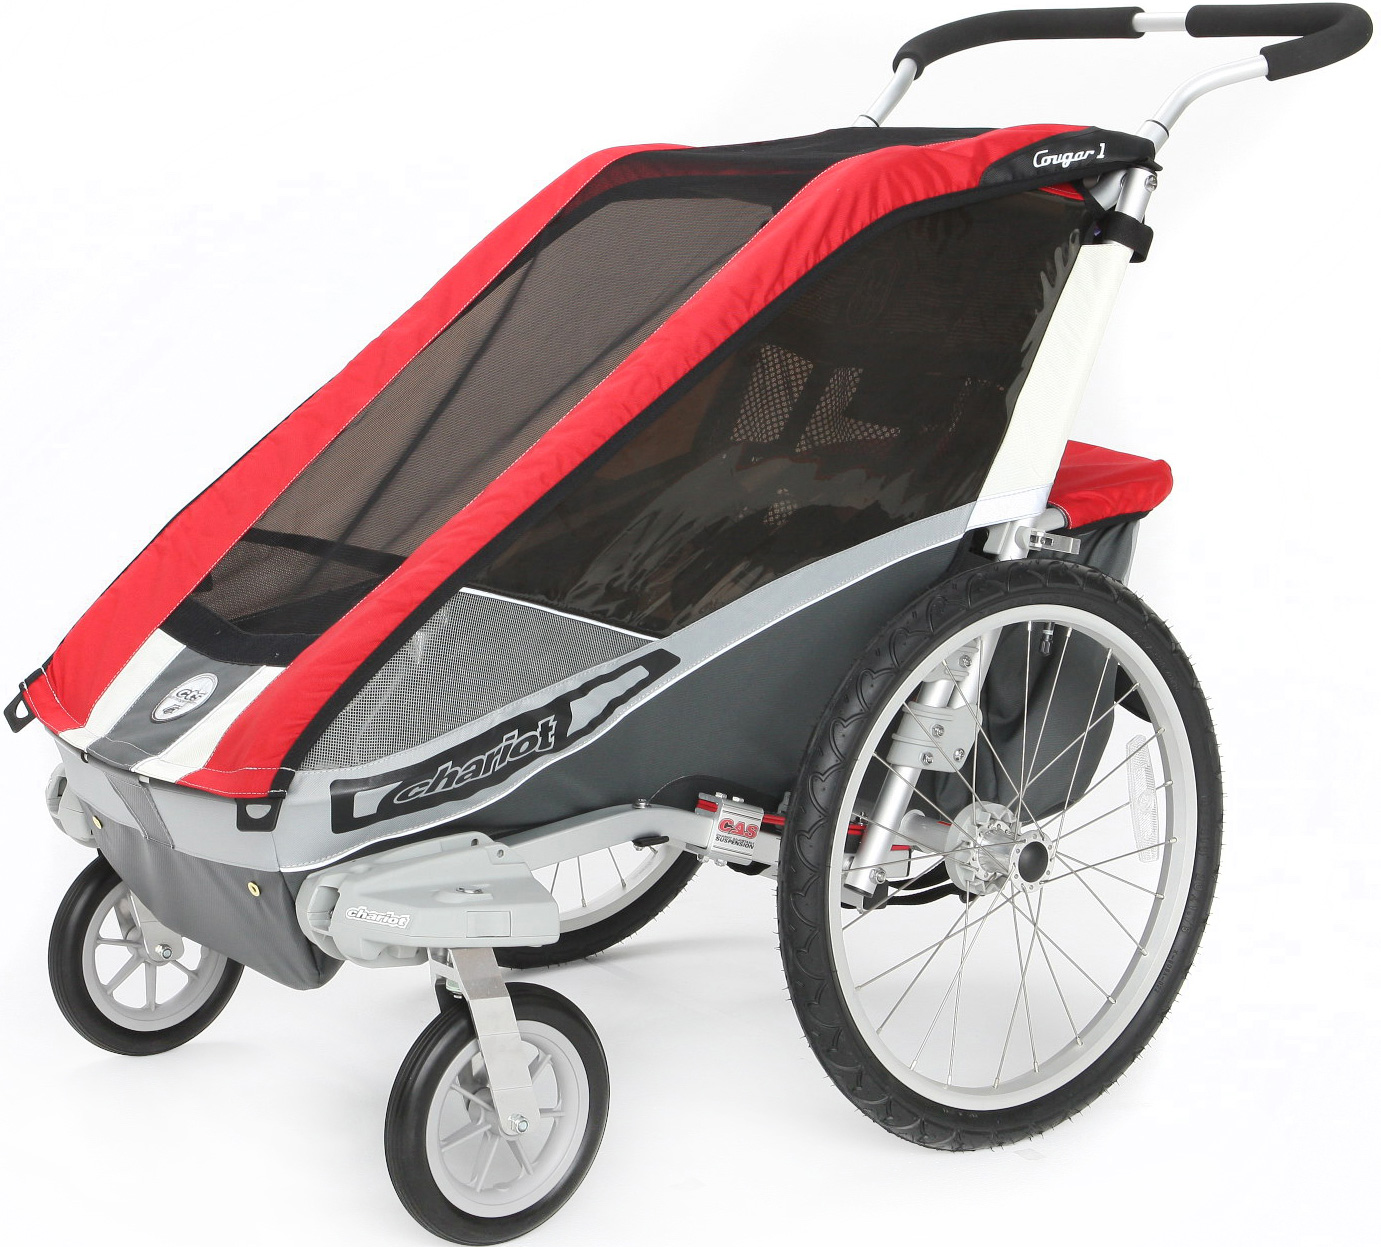 cheap double buggies for newborn and toddler